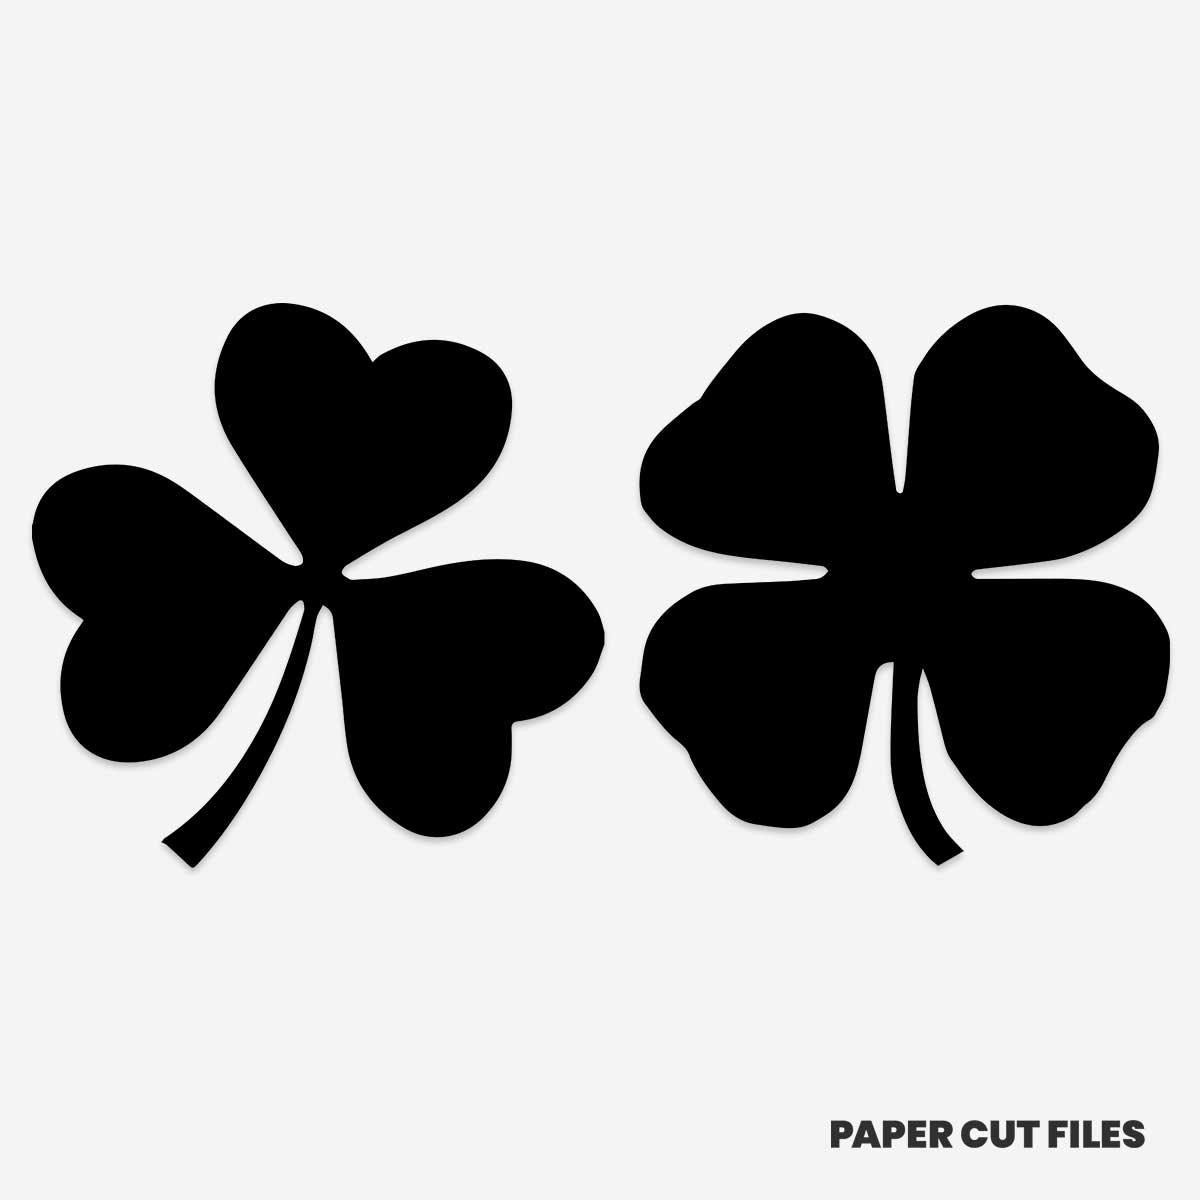 shamrock clipart black and white png